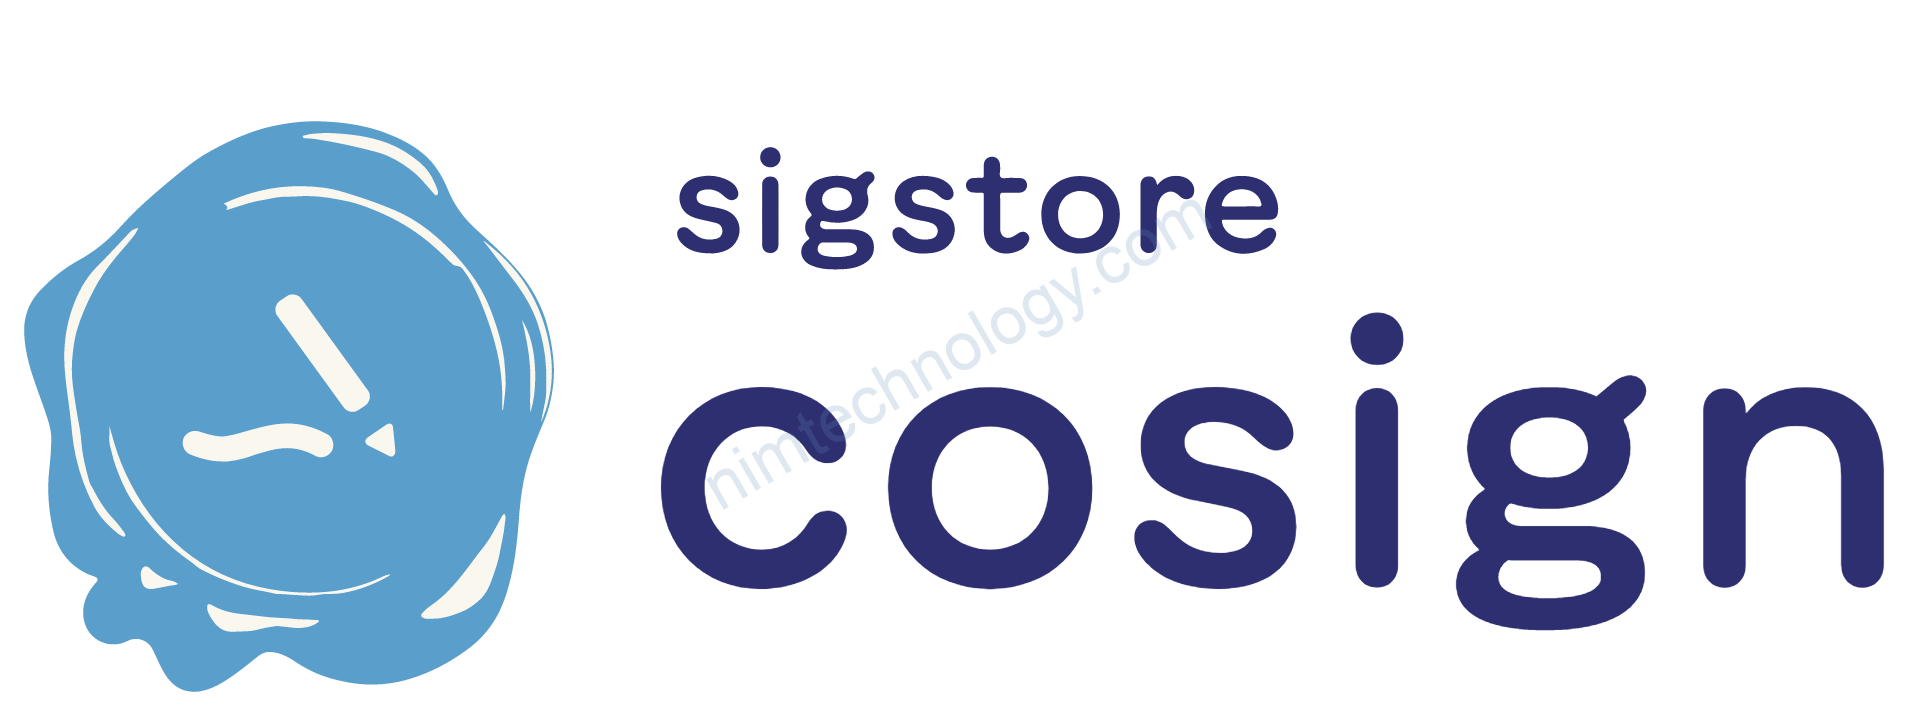 [Cosign/Kyverno]Signing And Verifying Container Images With Sigstore Cosign And Kyverno